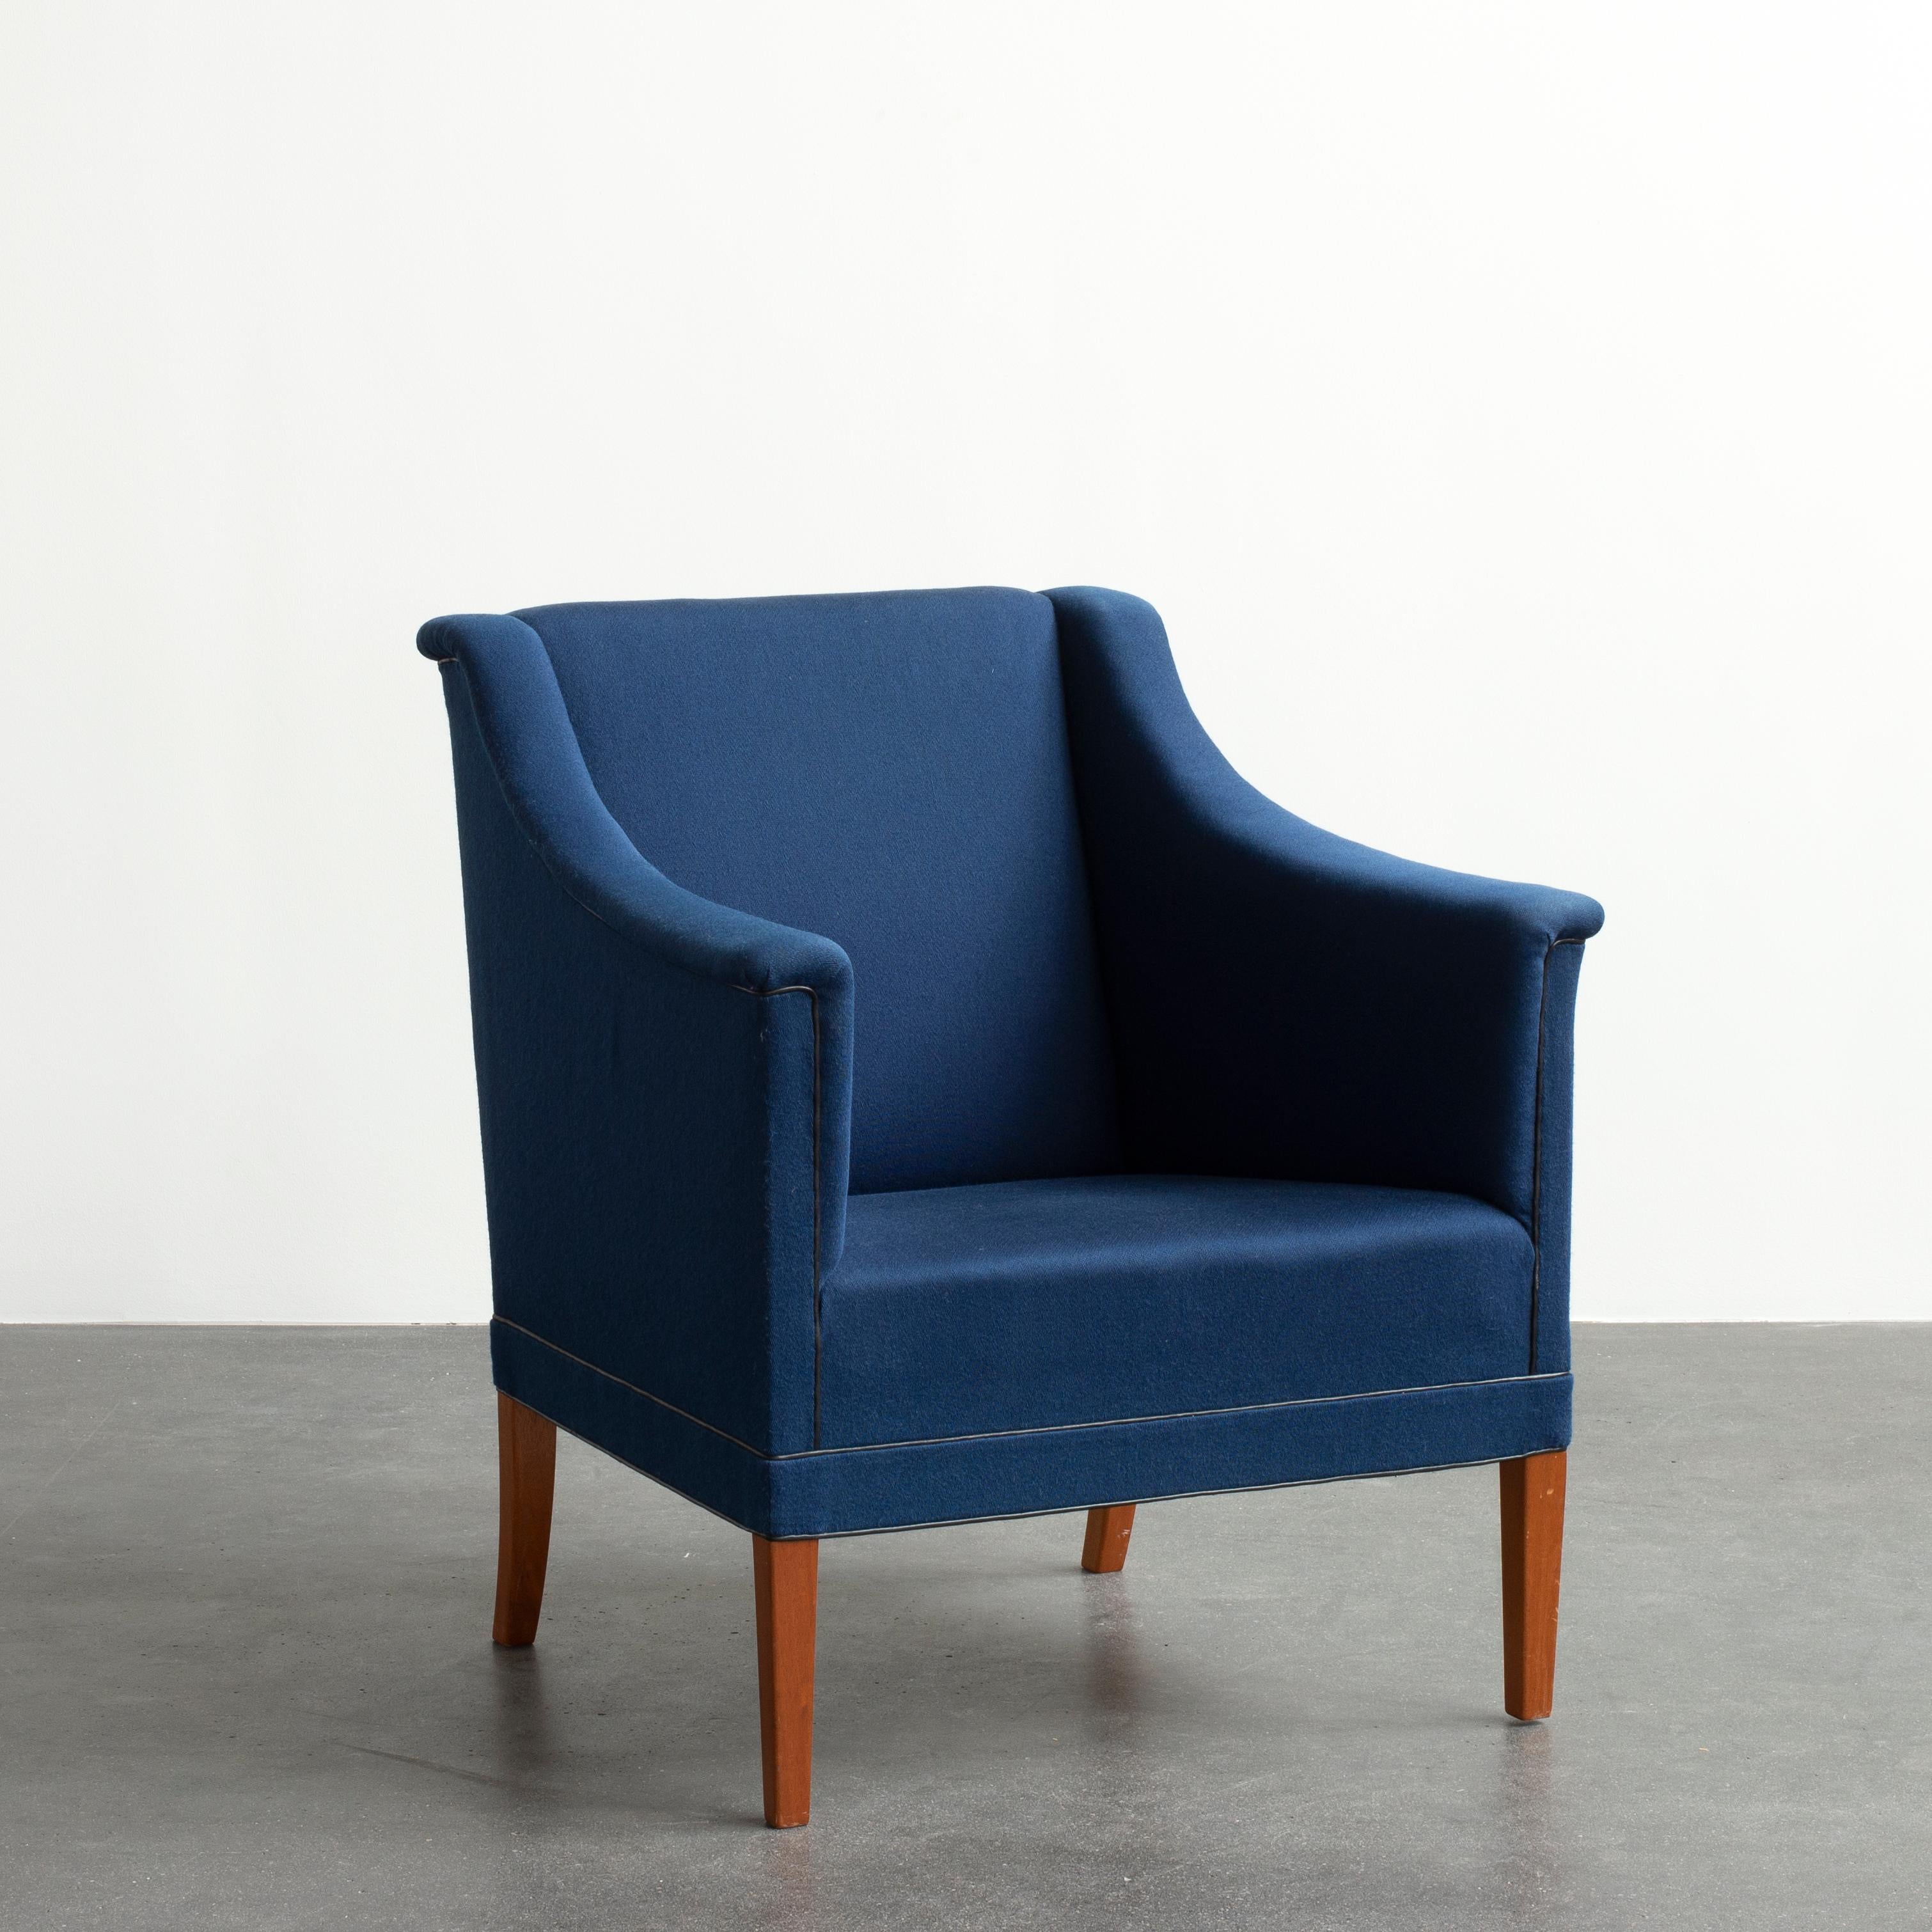 Kaare Klint easy chair with legs of mahogany. Seat, sides and back upholstered with blue wool. Executed by Rud. Rasmussen.

Reverse with paper label ‘RUD. RASMUSSENS/SNEDKERIER/KØBENHAVN/DANMARK and architect's monogrammed paper label.